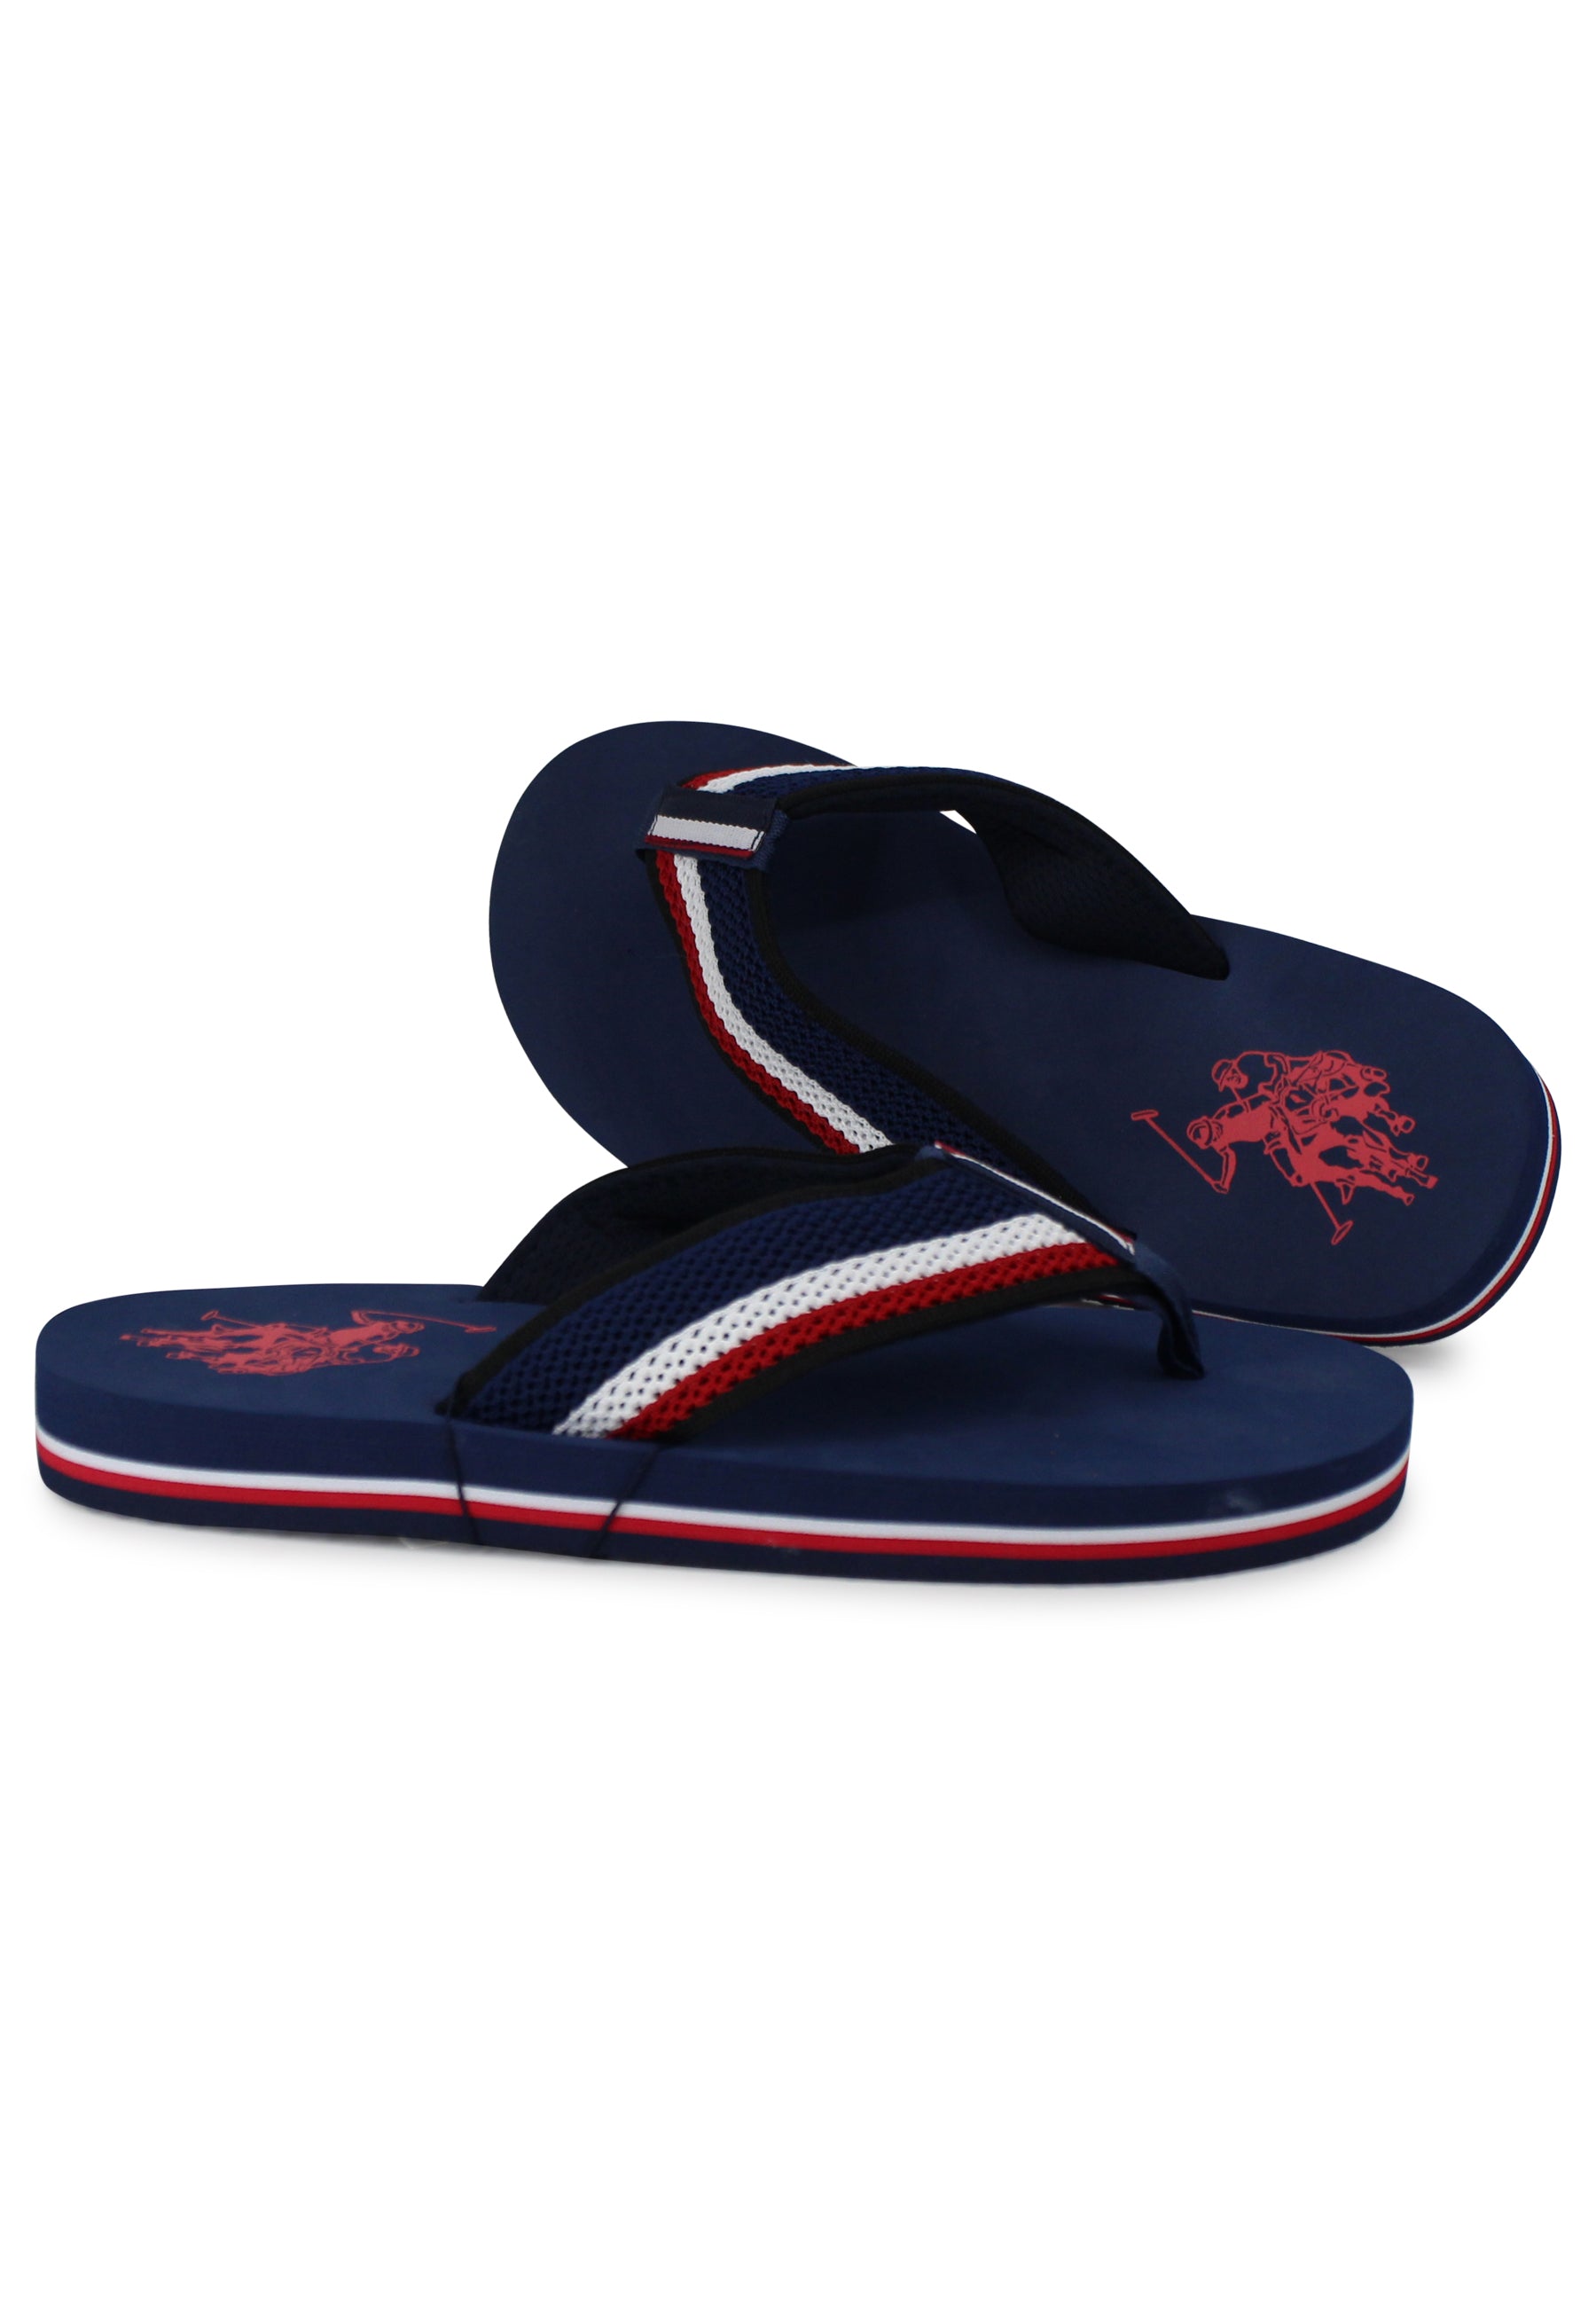 Men's flip flops in blue fabric with light rubber sole